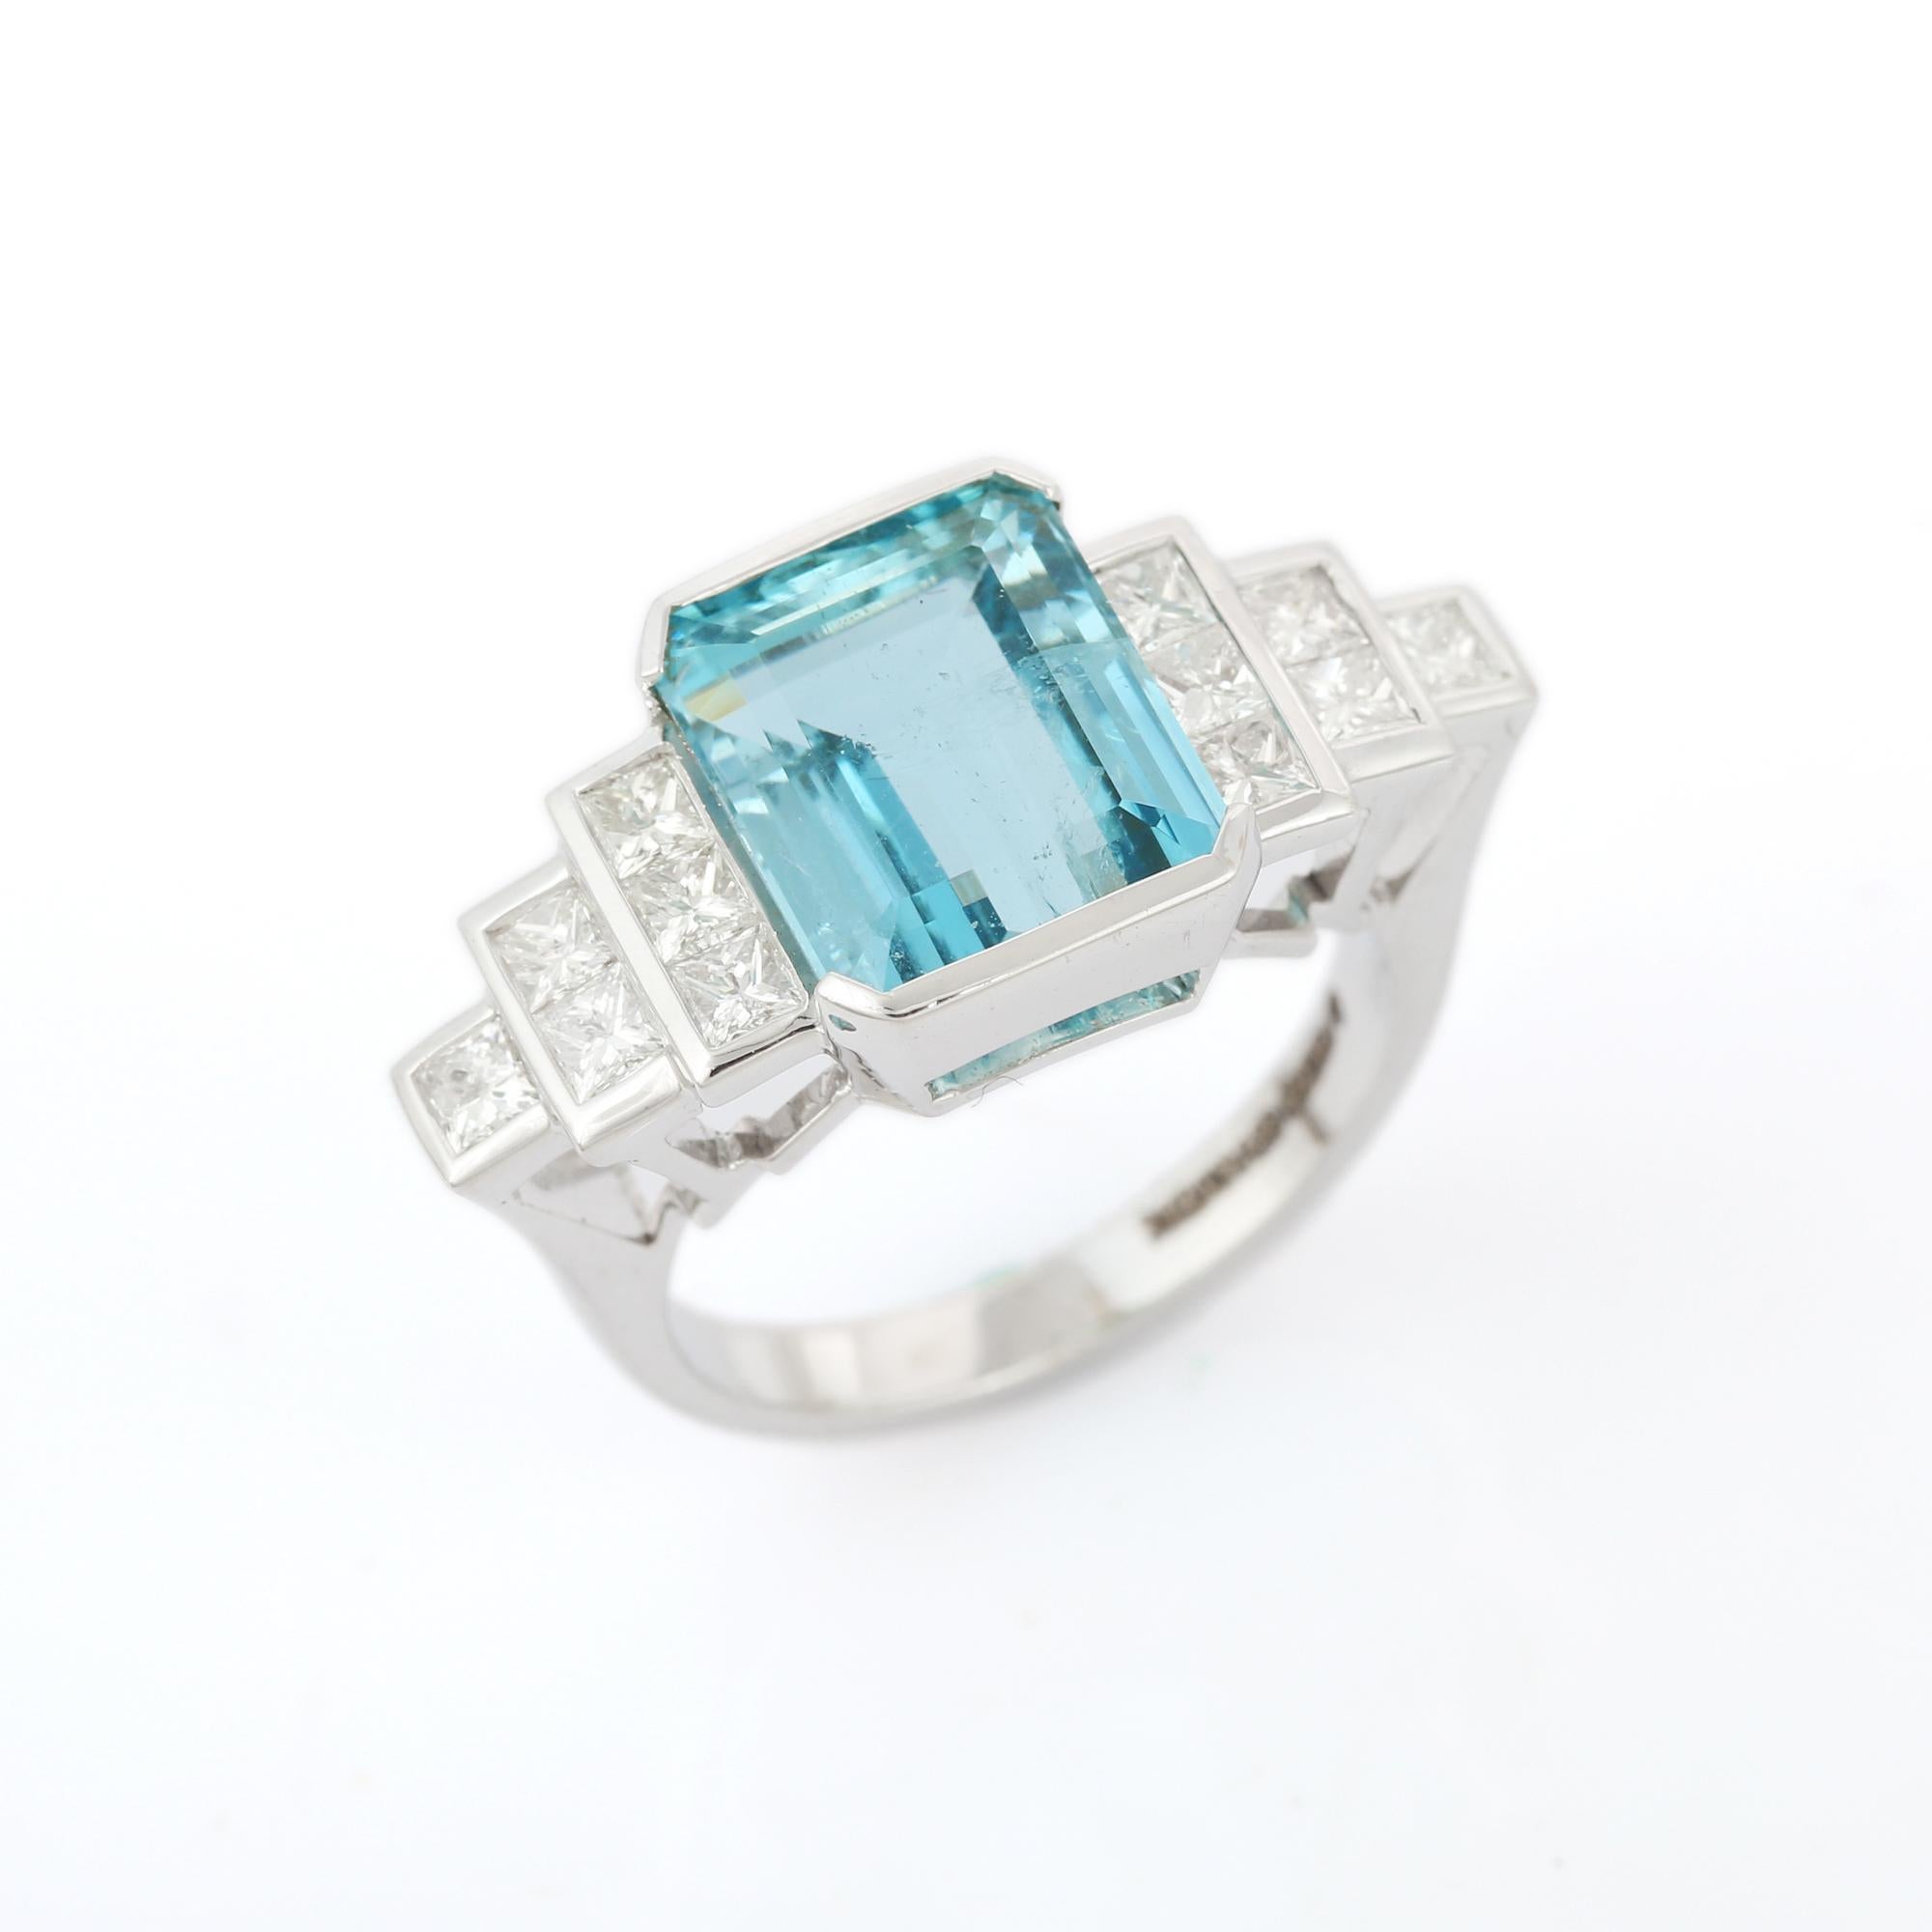 For Sale:  5.79 Carats Aquamarine and Diamond Ring in 18K White Gold 5